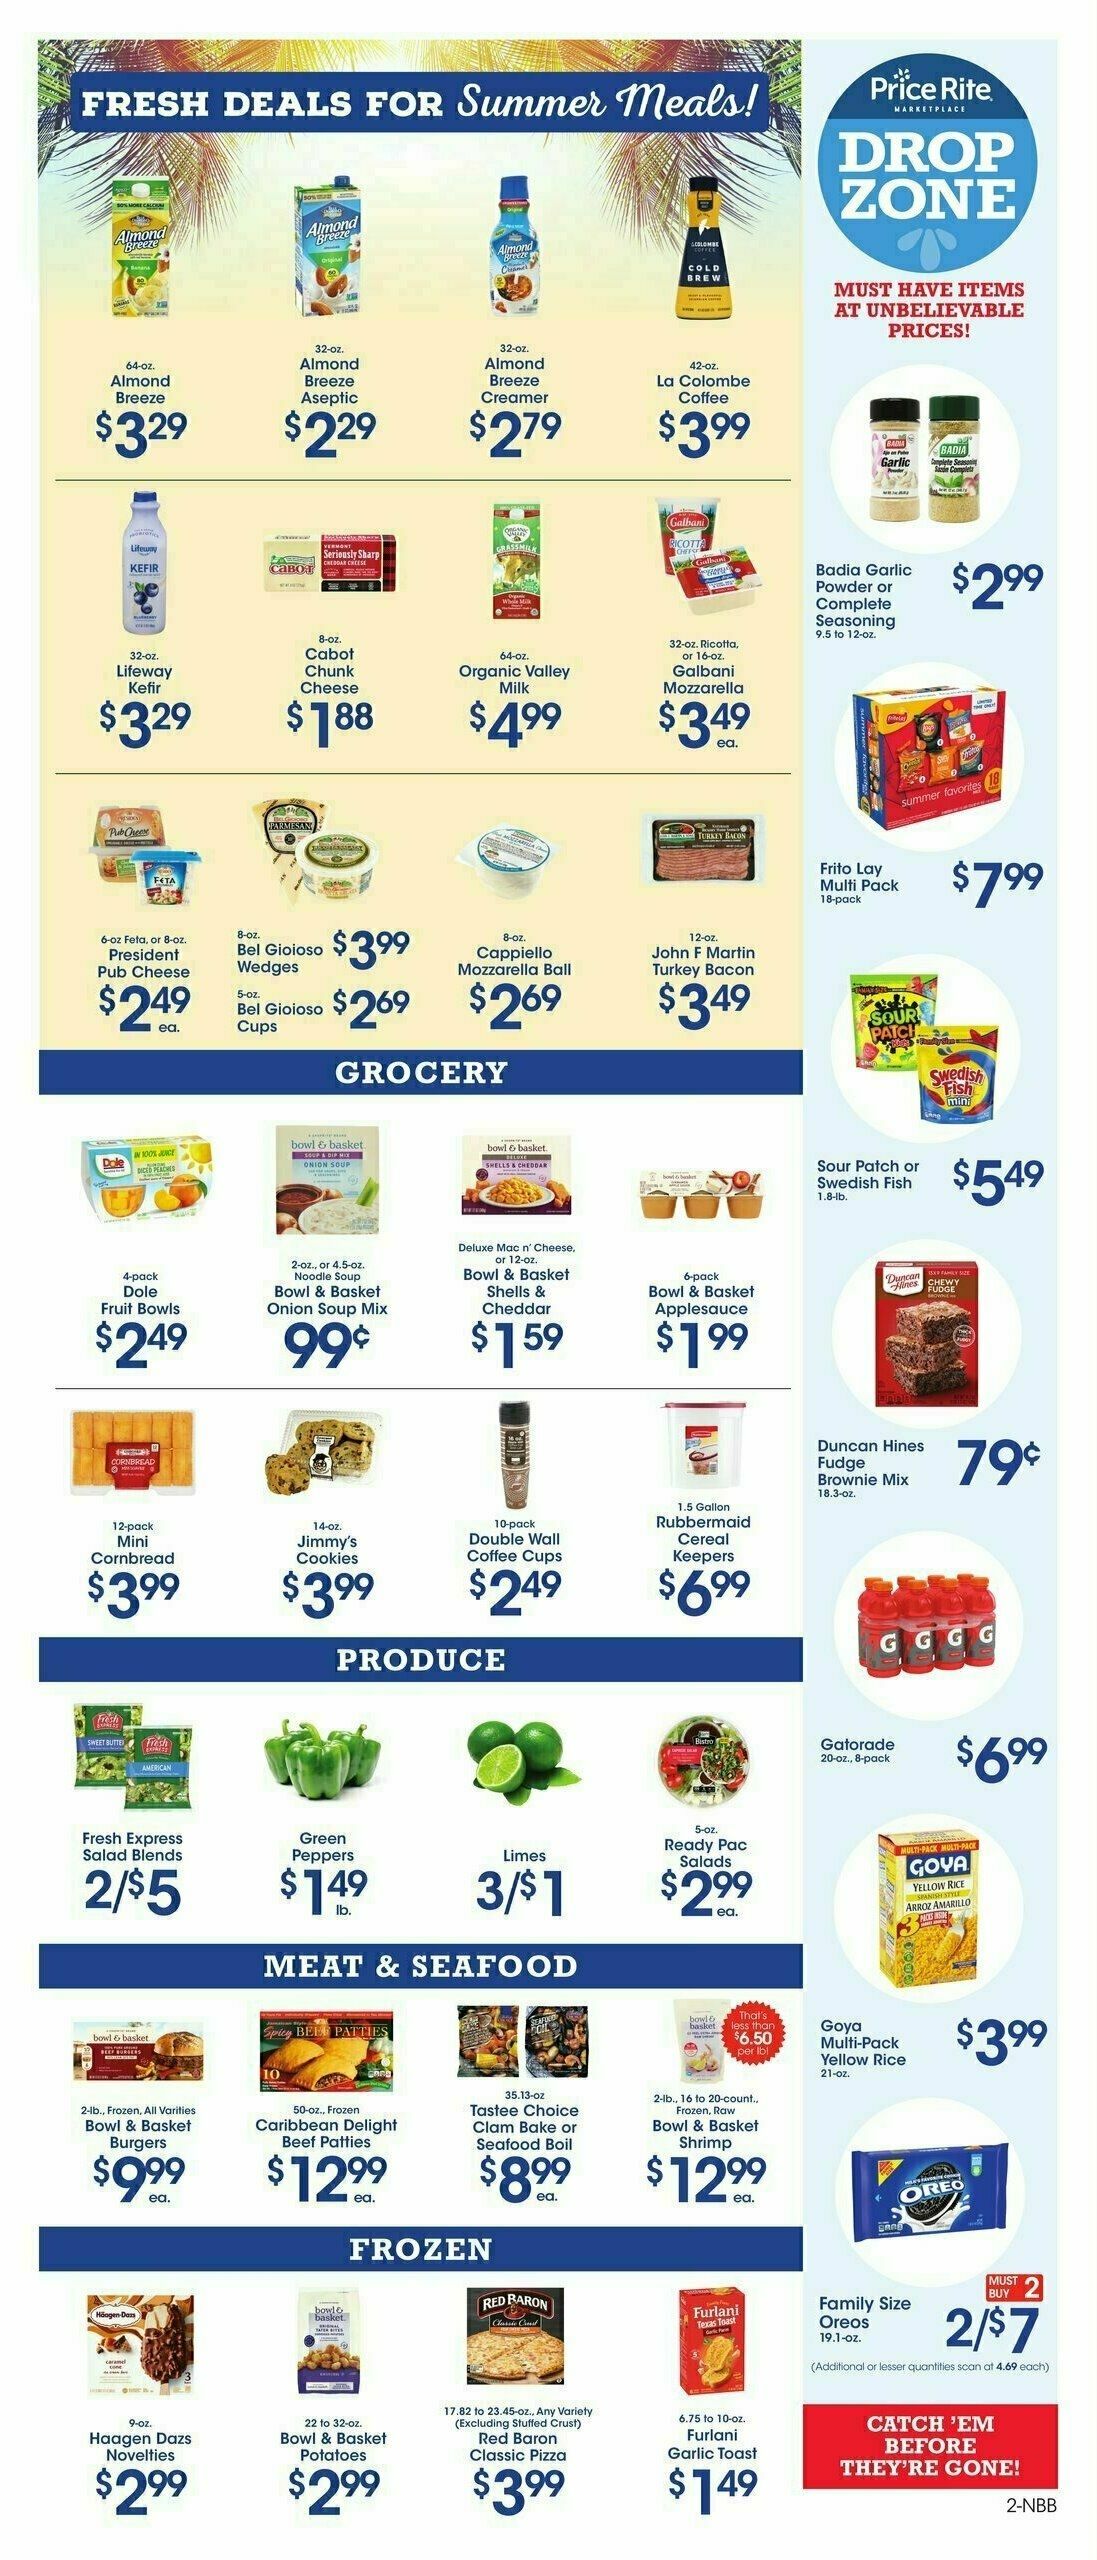 Price Rite Weekly Ad from August 4